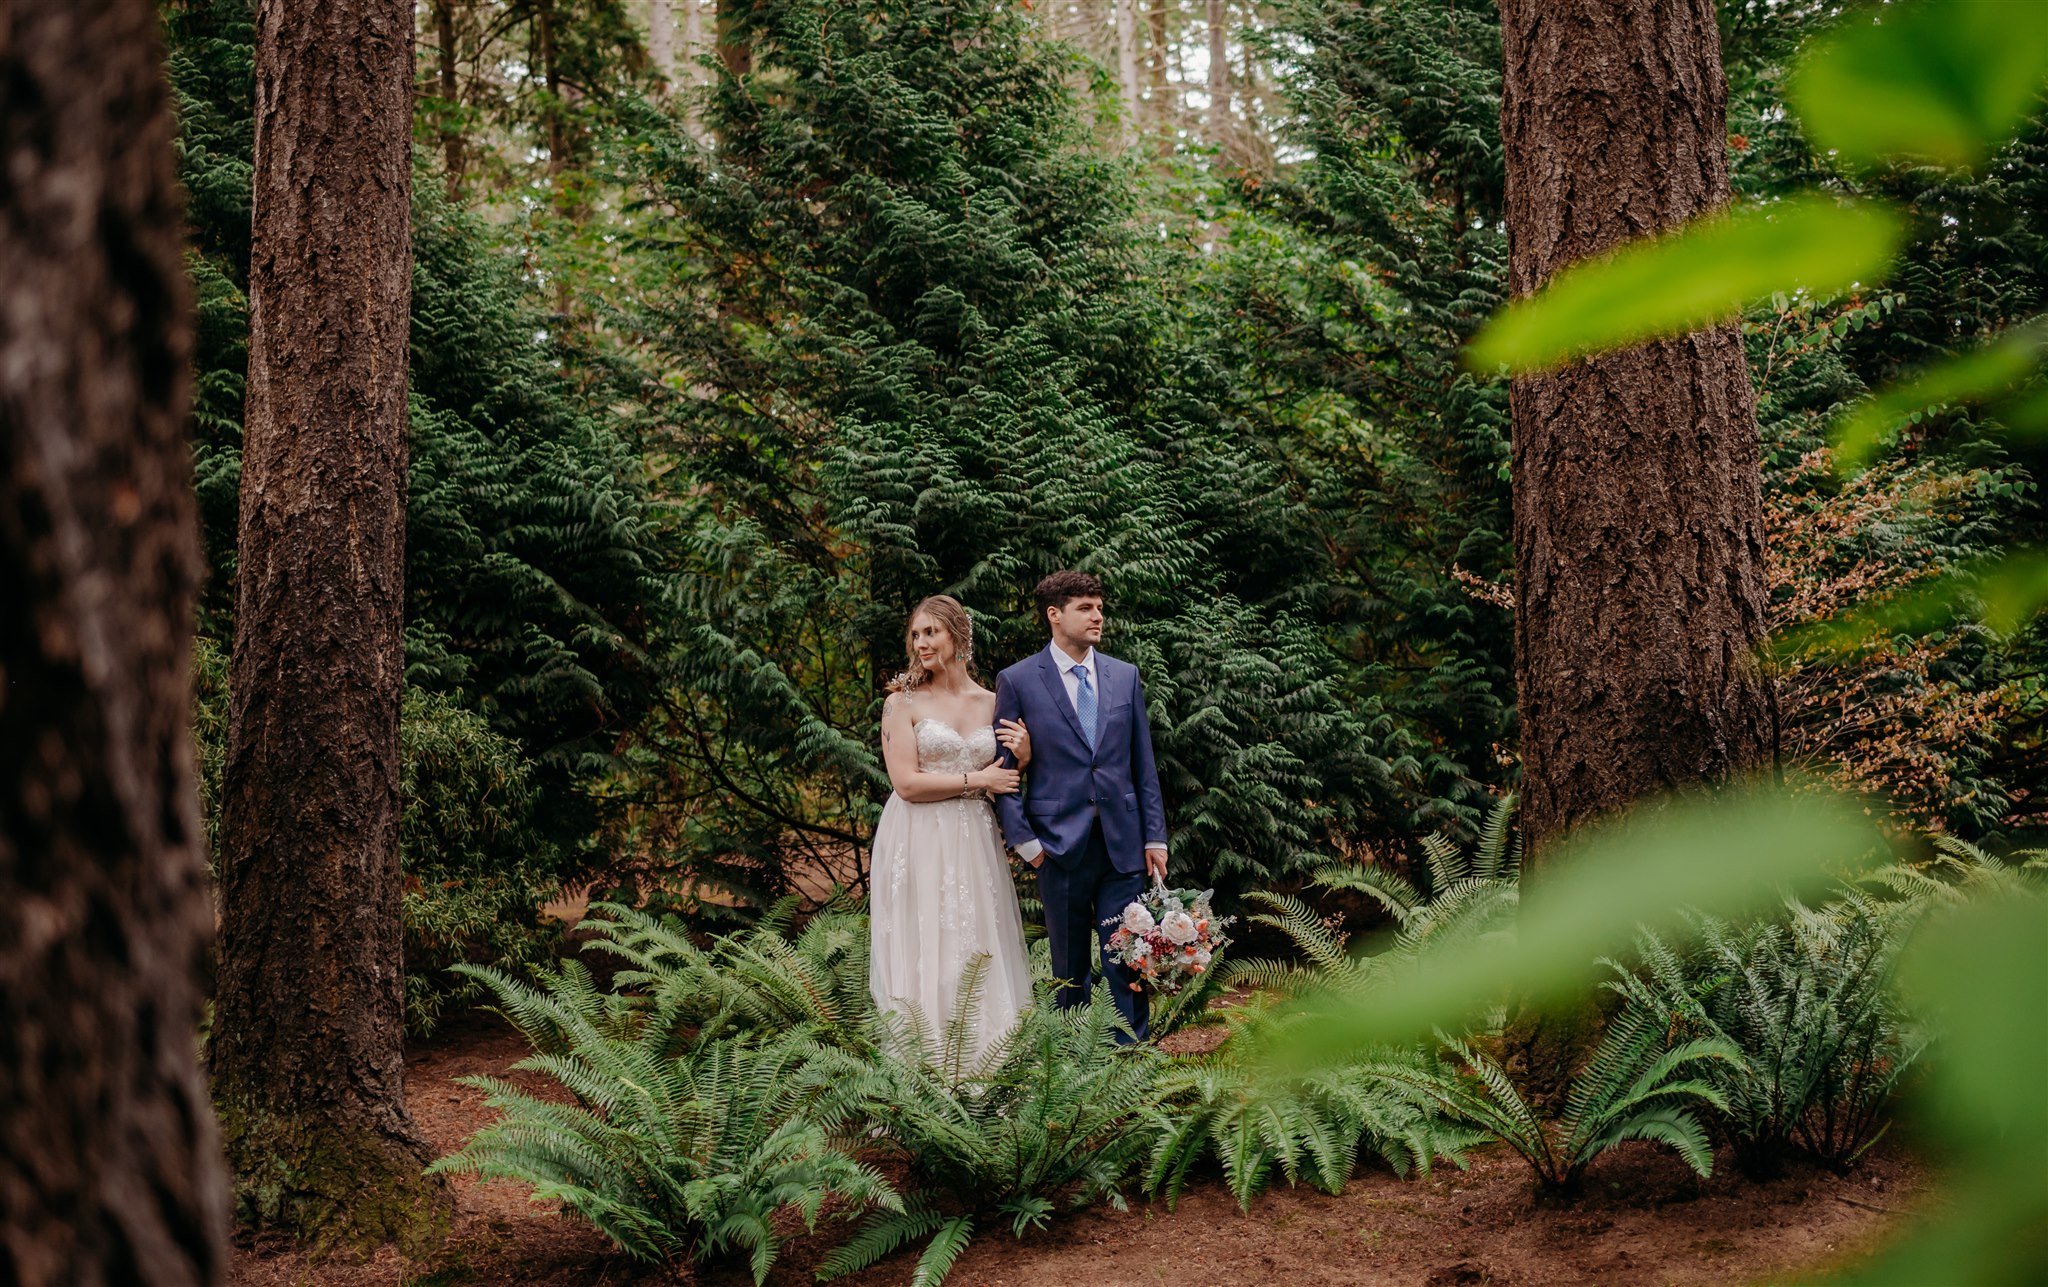 Kiley and david had an intimate, rainy day garden wedding at Evergreen Gardens in Ferndale, WA. Photographed by a local Seattle wedding photographer Lucia Giuseppina Photography.